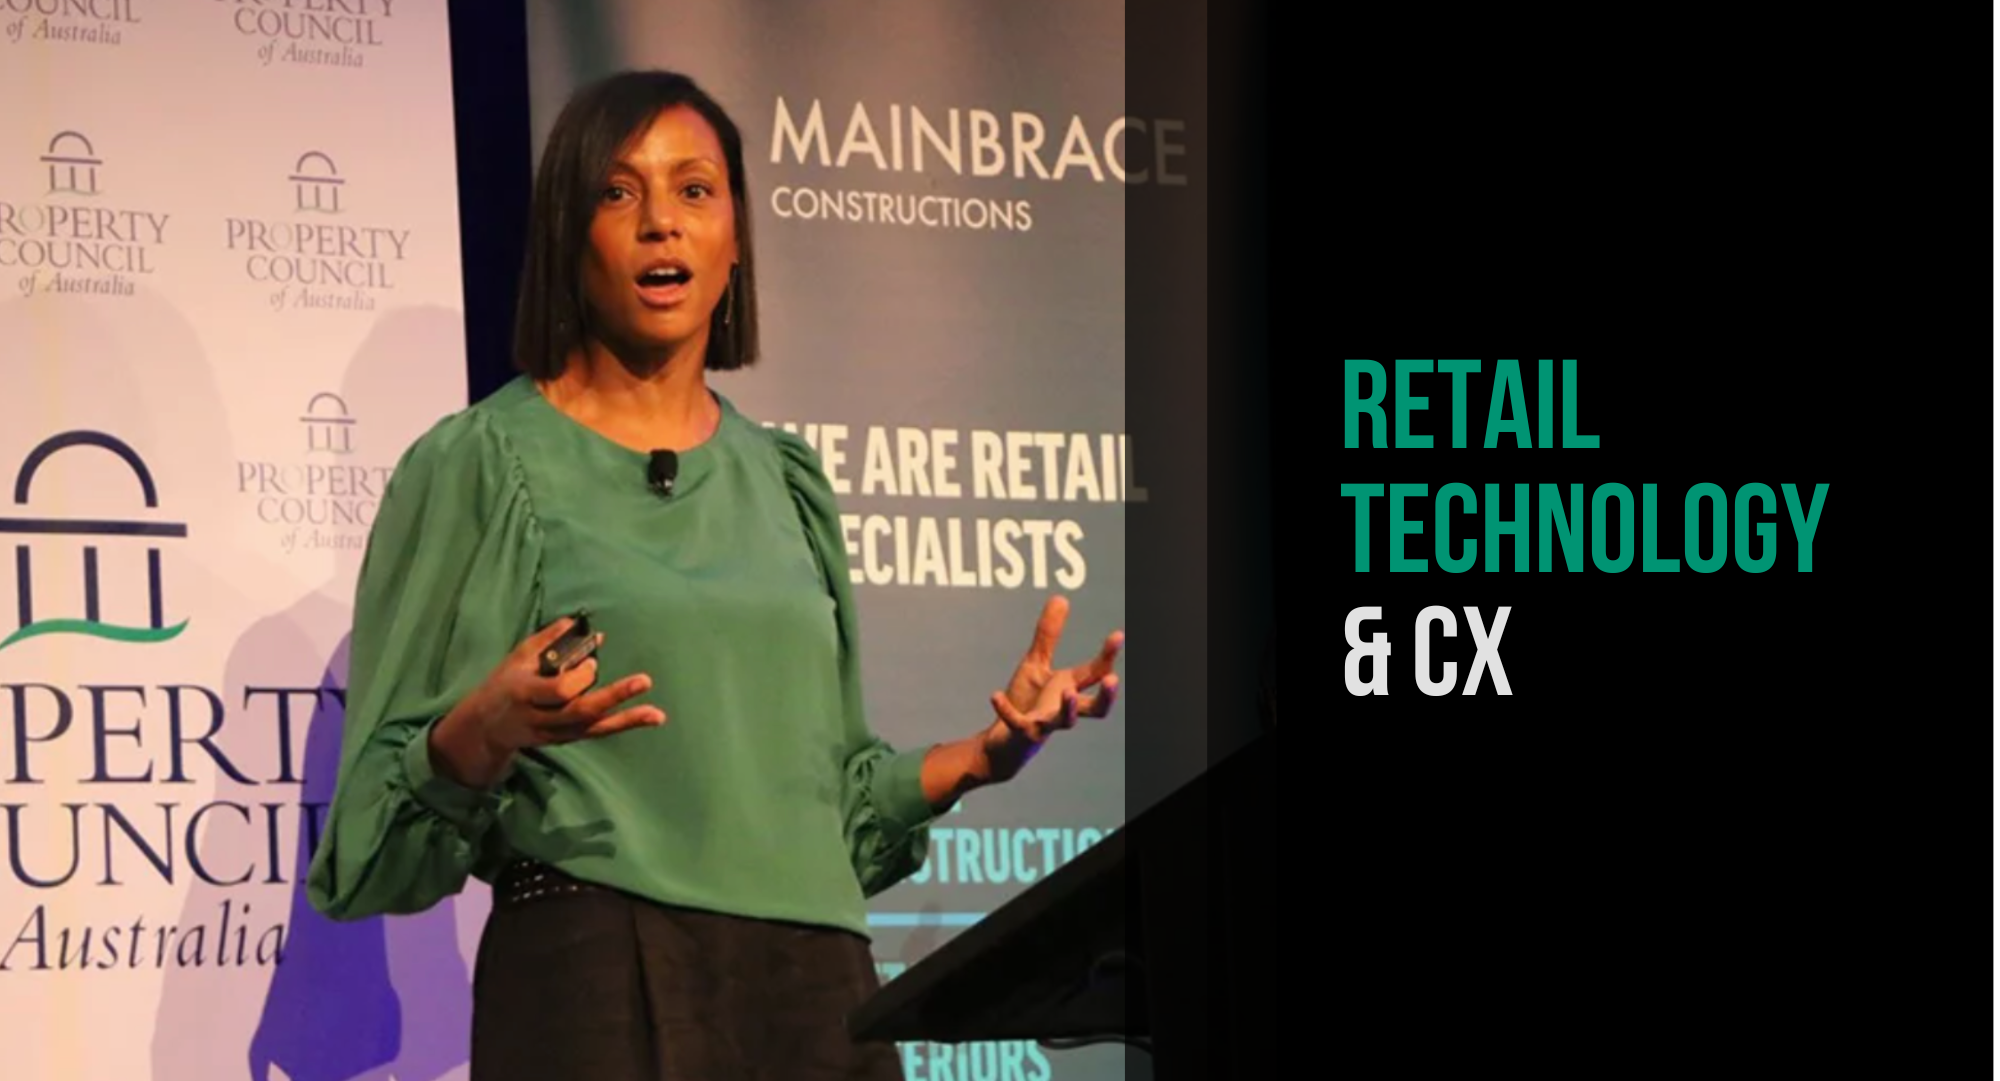 Retail technology and customer experience